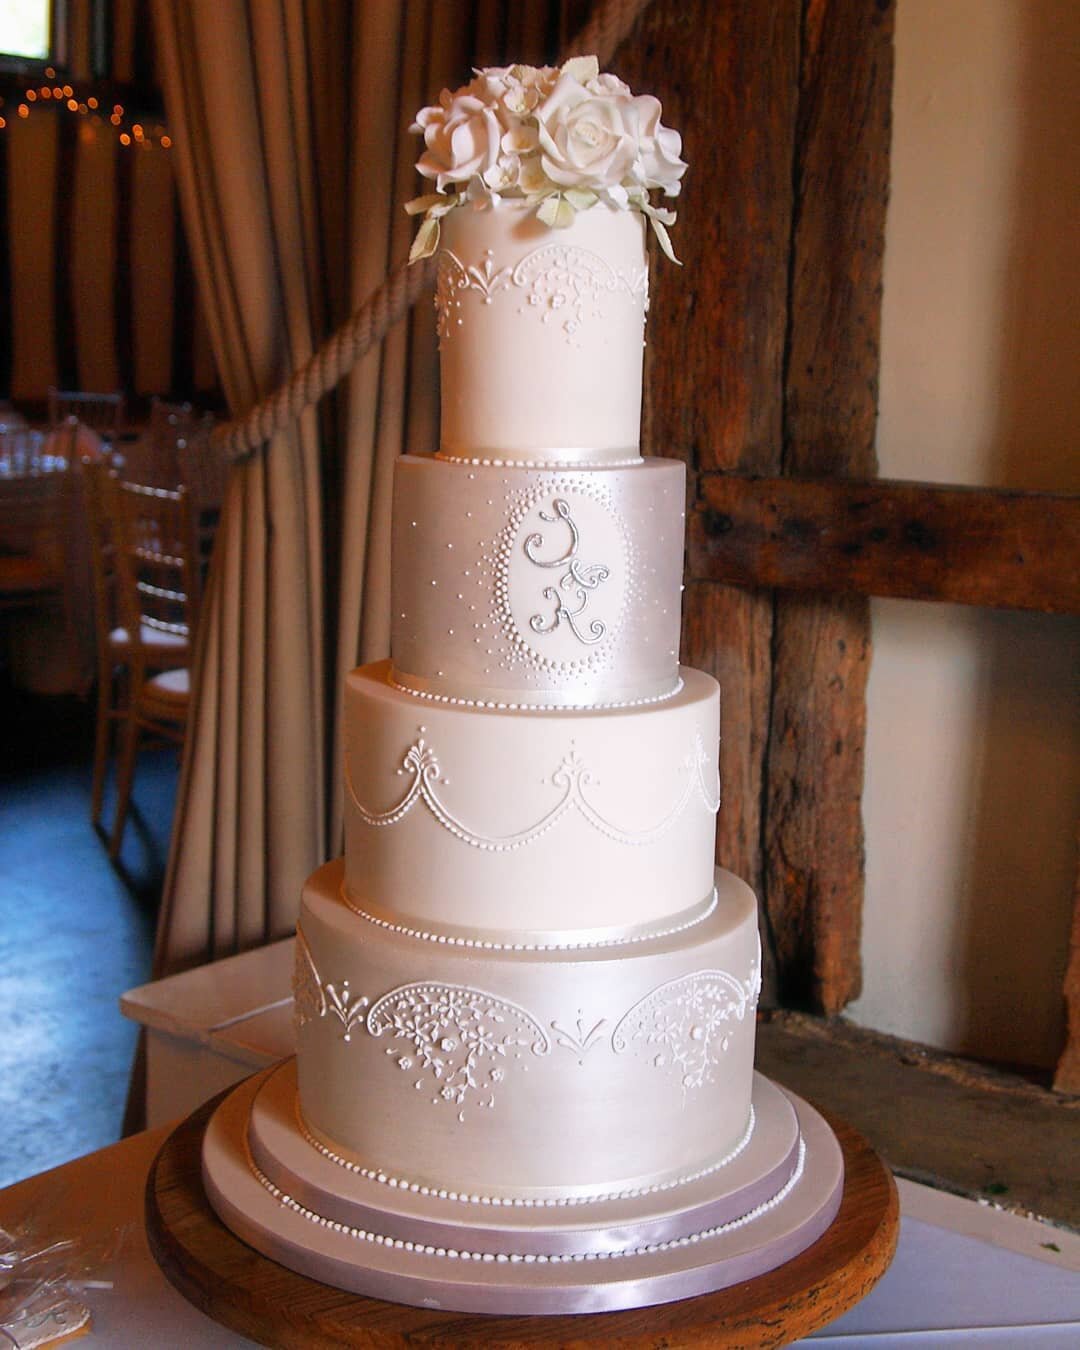 Intricate piped work for a cake I created a few years ago. The couple wanted only white with some silver and both the bride and groom loved my piped work. I created a design where their monogram was piped on one tier and two of the tiers were brushed